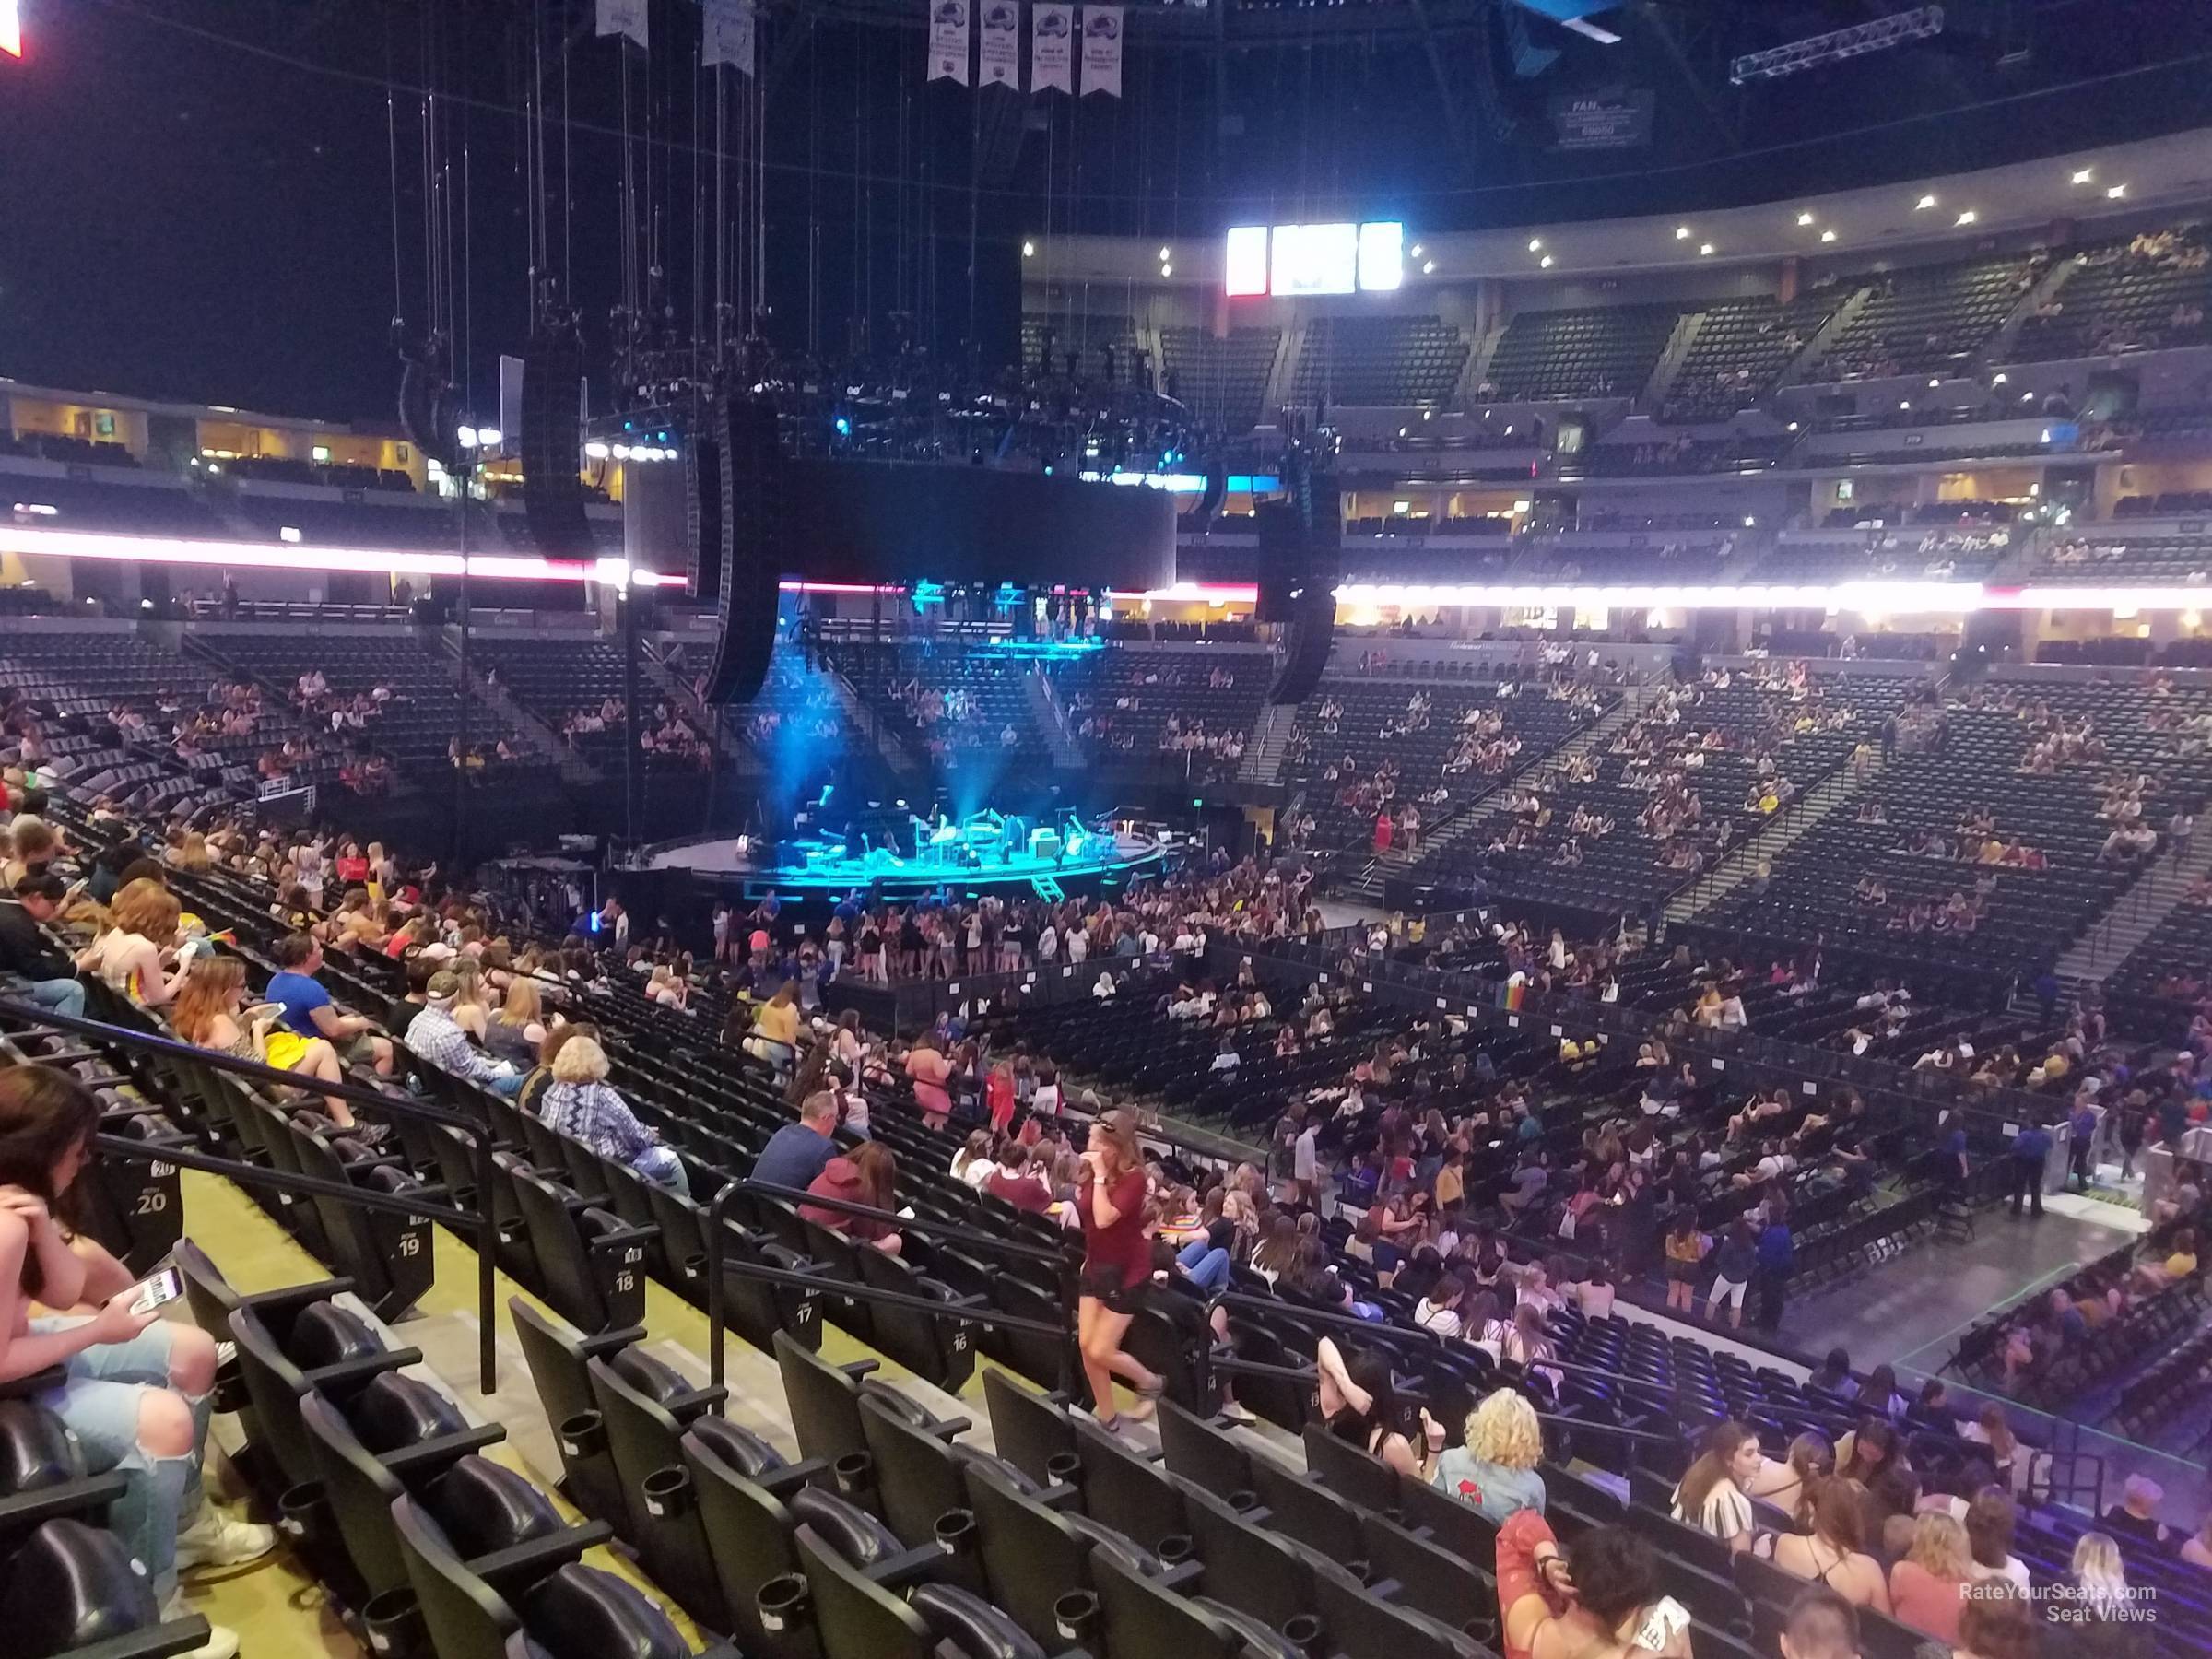 Pepsi Center Section 122 Concert Seating - RateYourSeats.com2400 x 1800